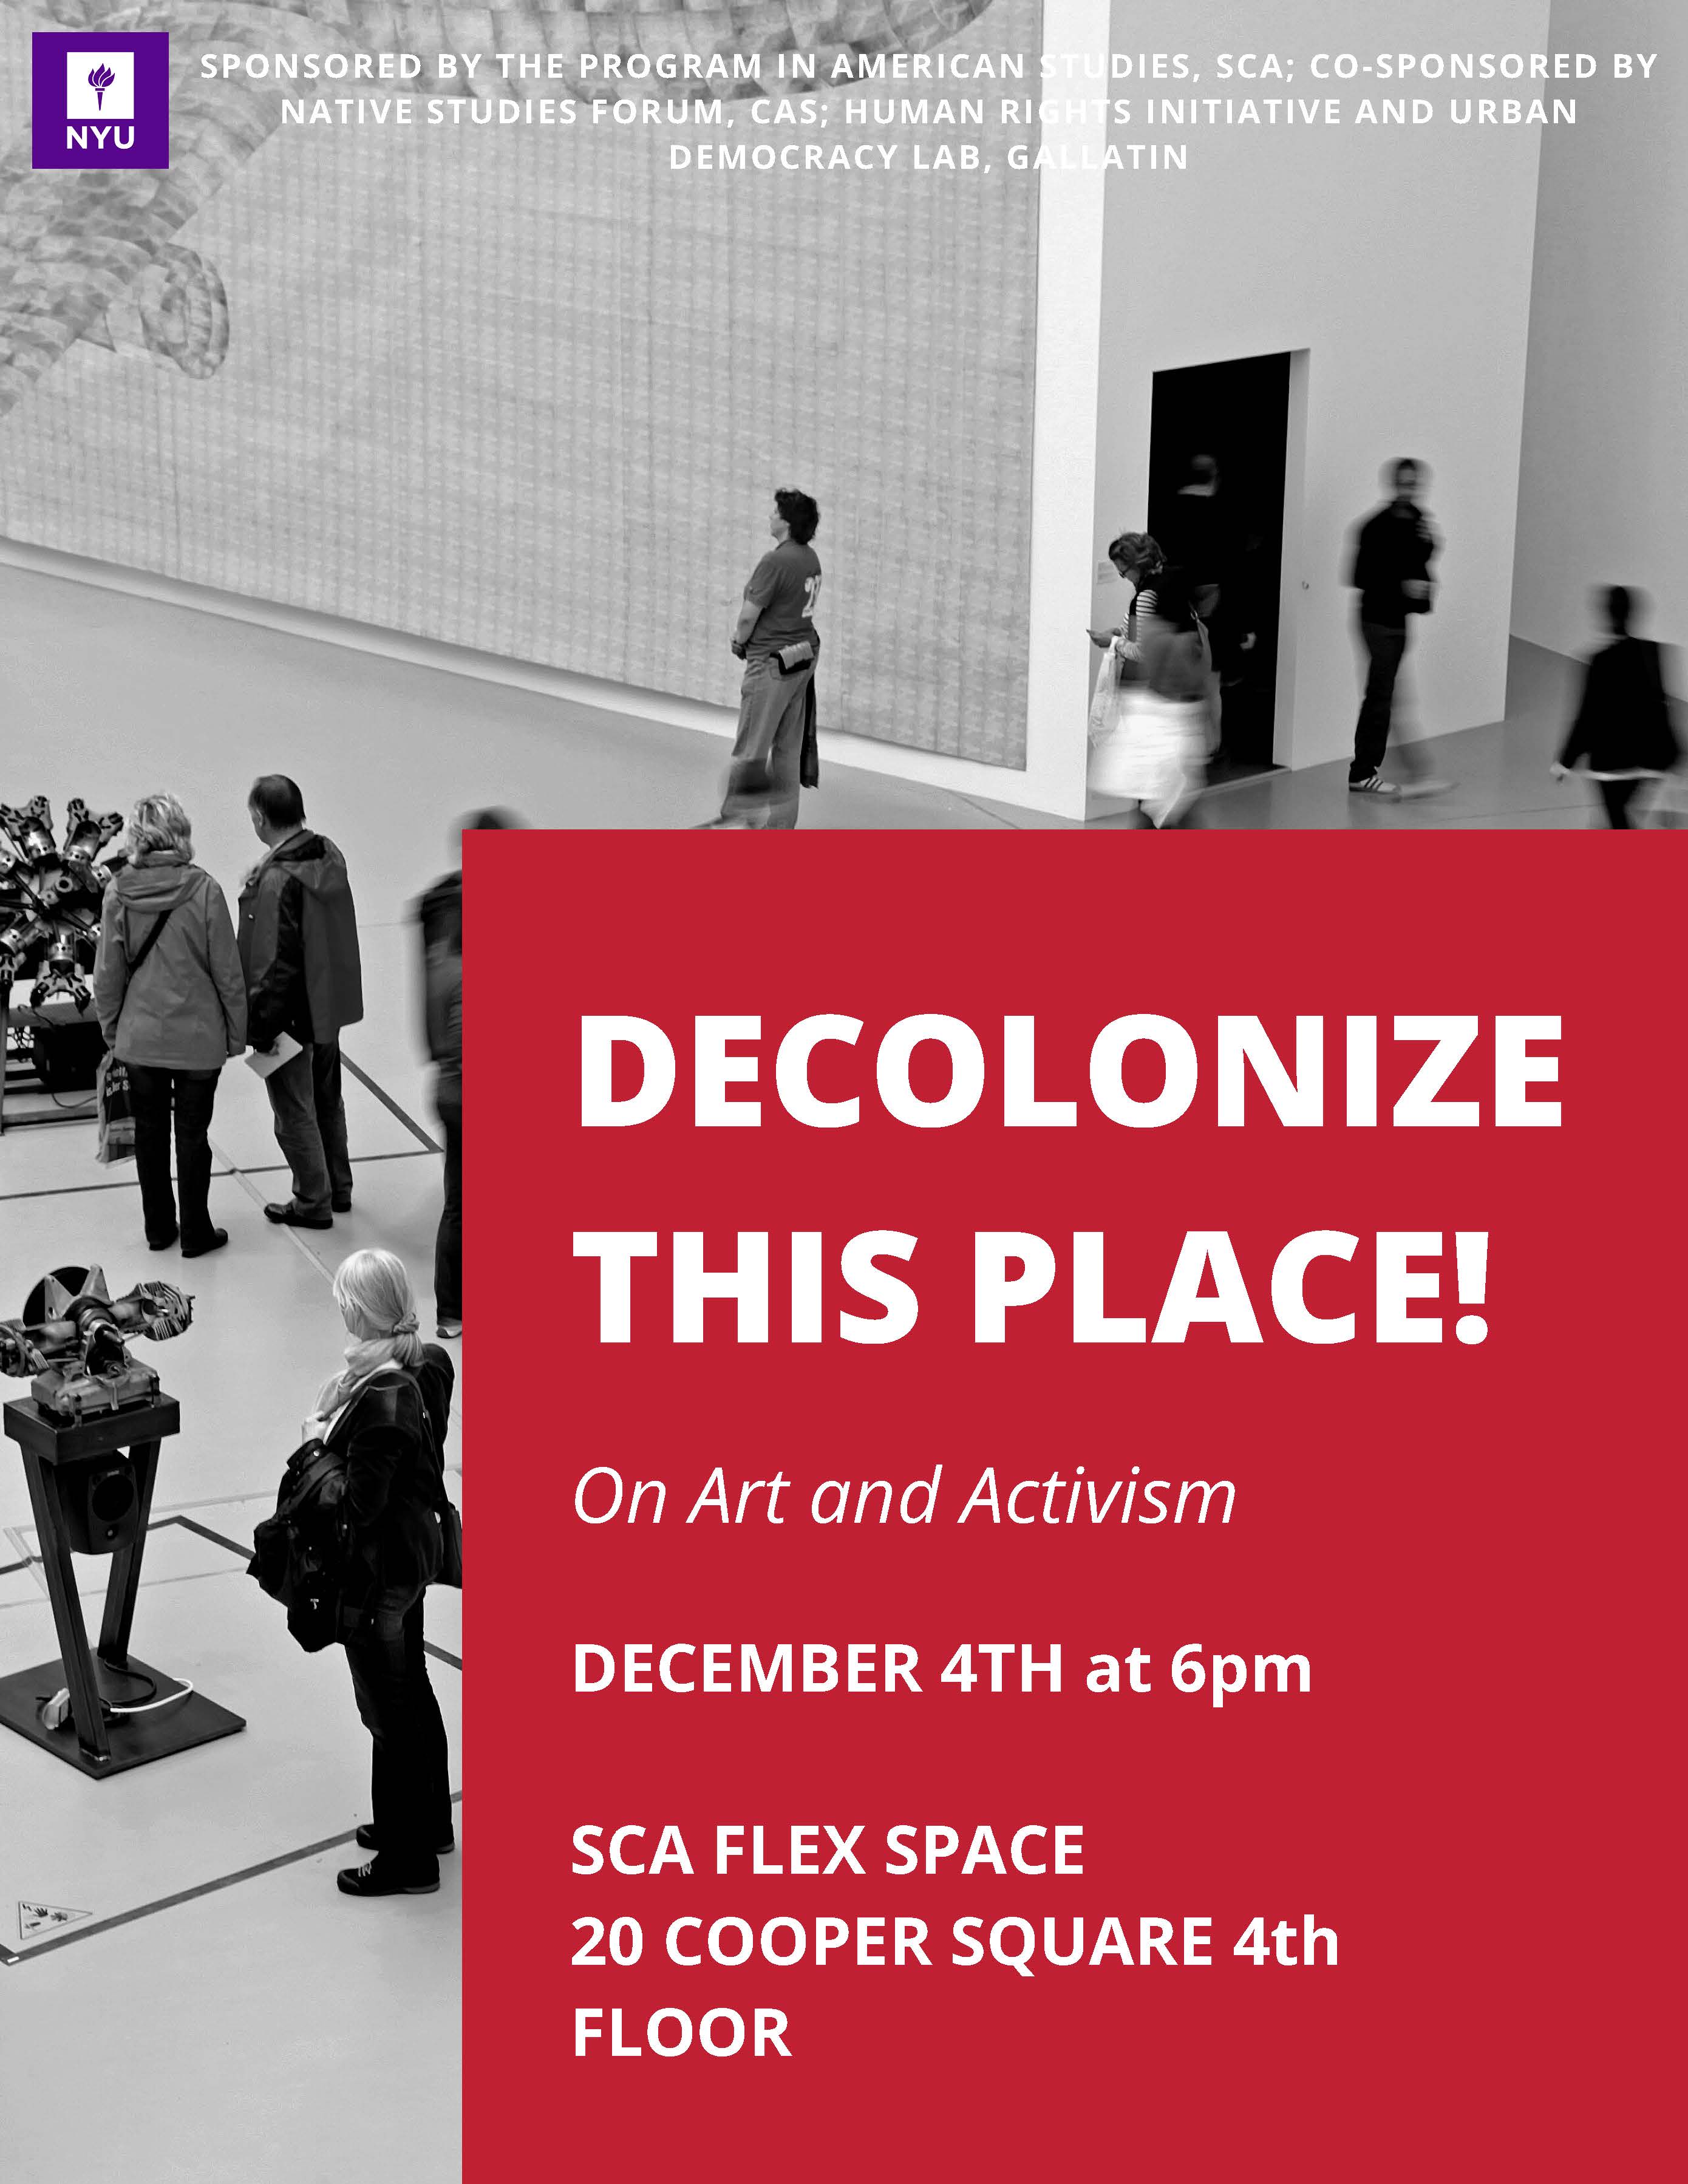 DECOLONIZE THIS PLACE! On Art and Activism